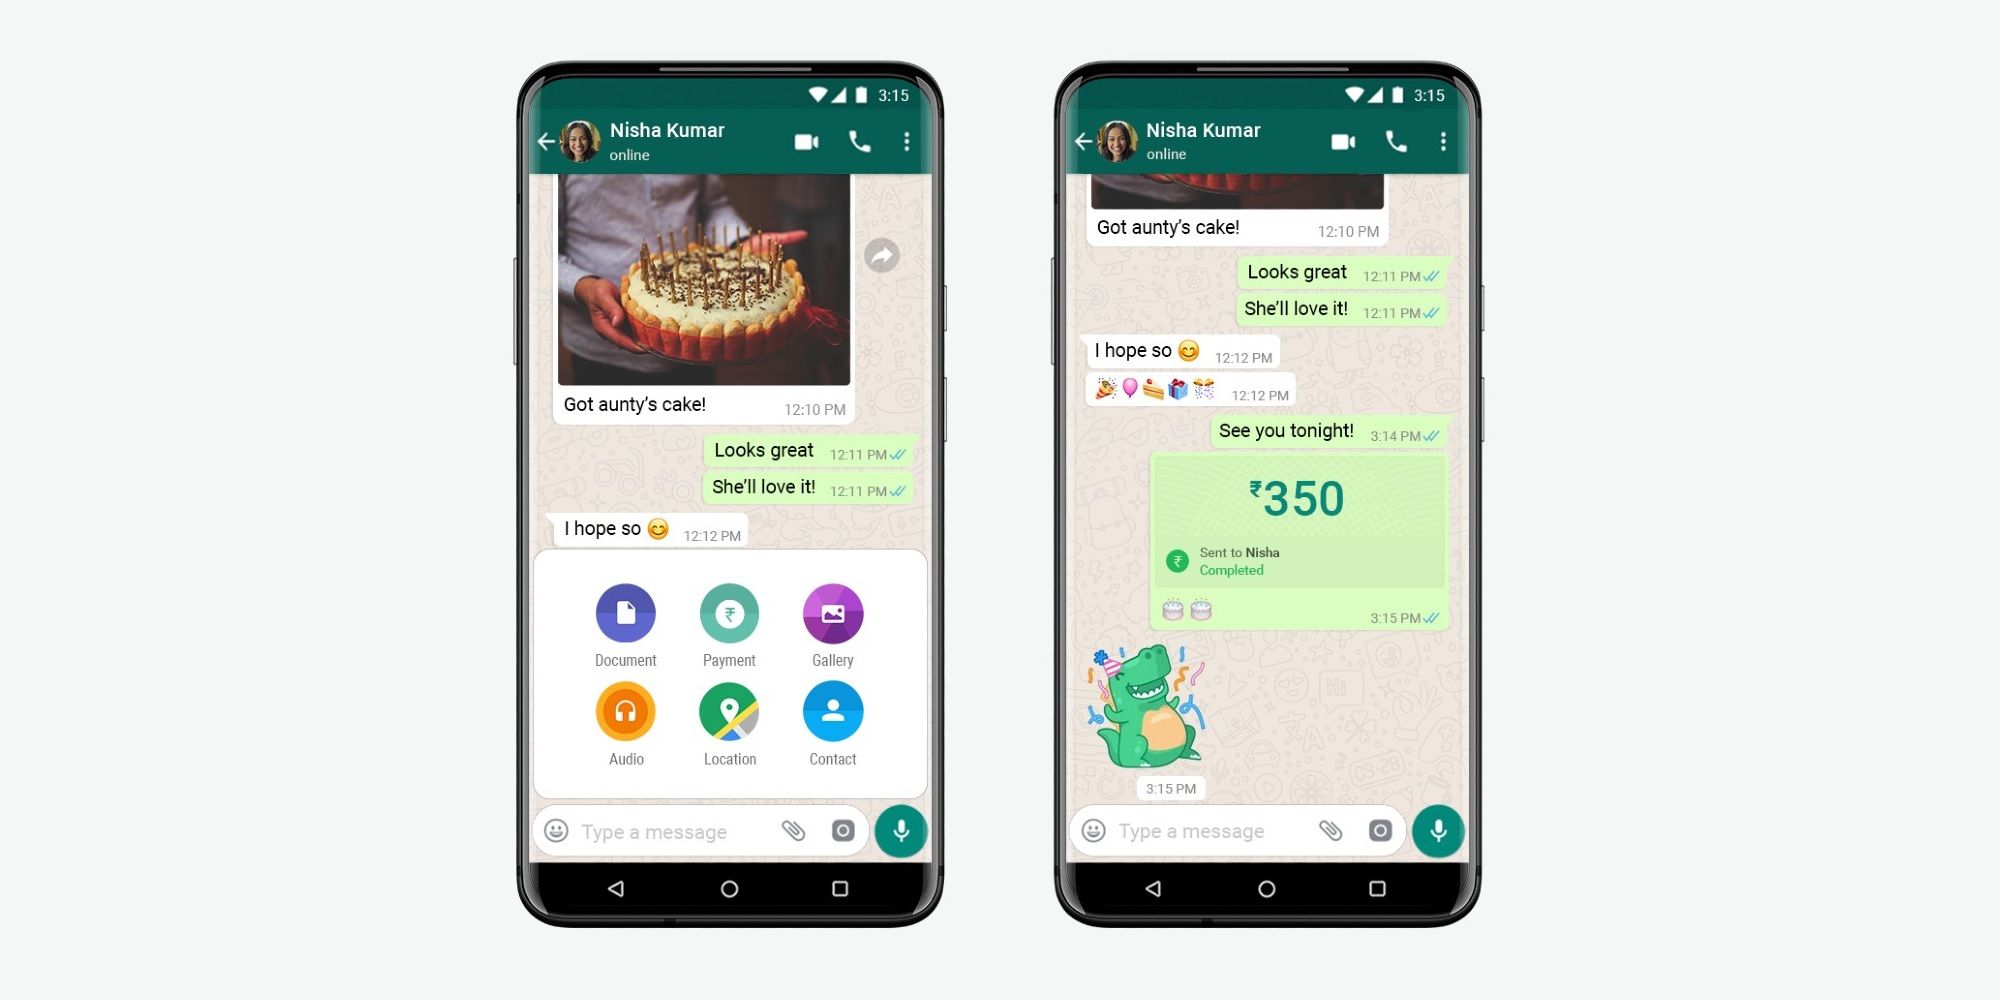 WhatsApp's payment functionality in India